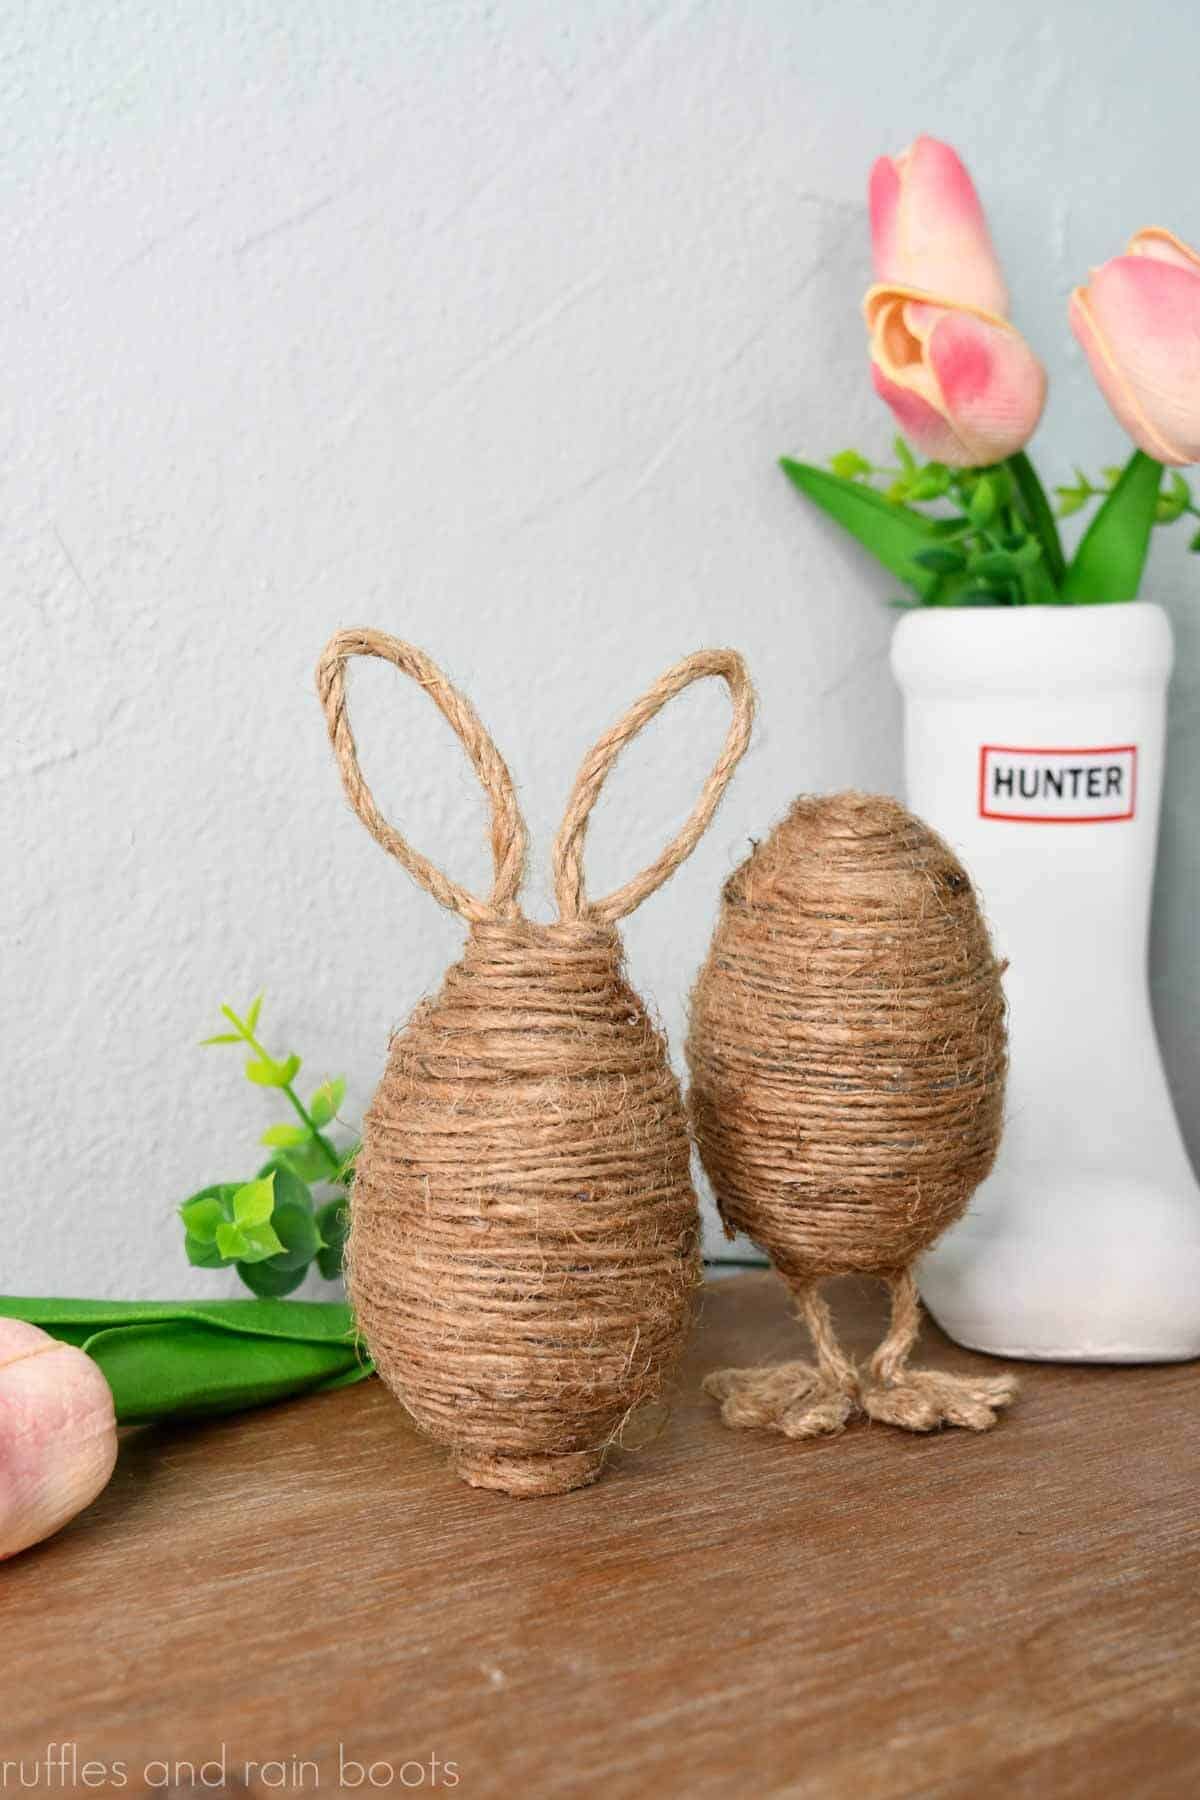 Vertical image with twine wrapped plastic eggs on a wood table in front of a light gray wall with tulips and spring greenery.